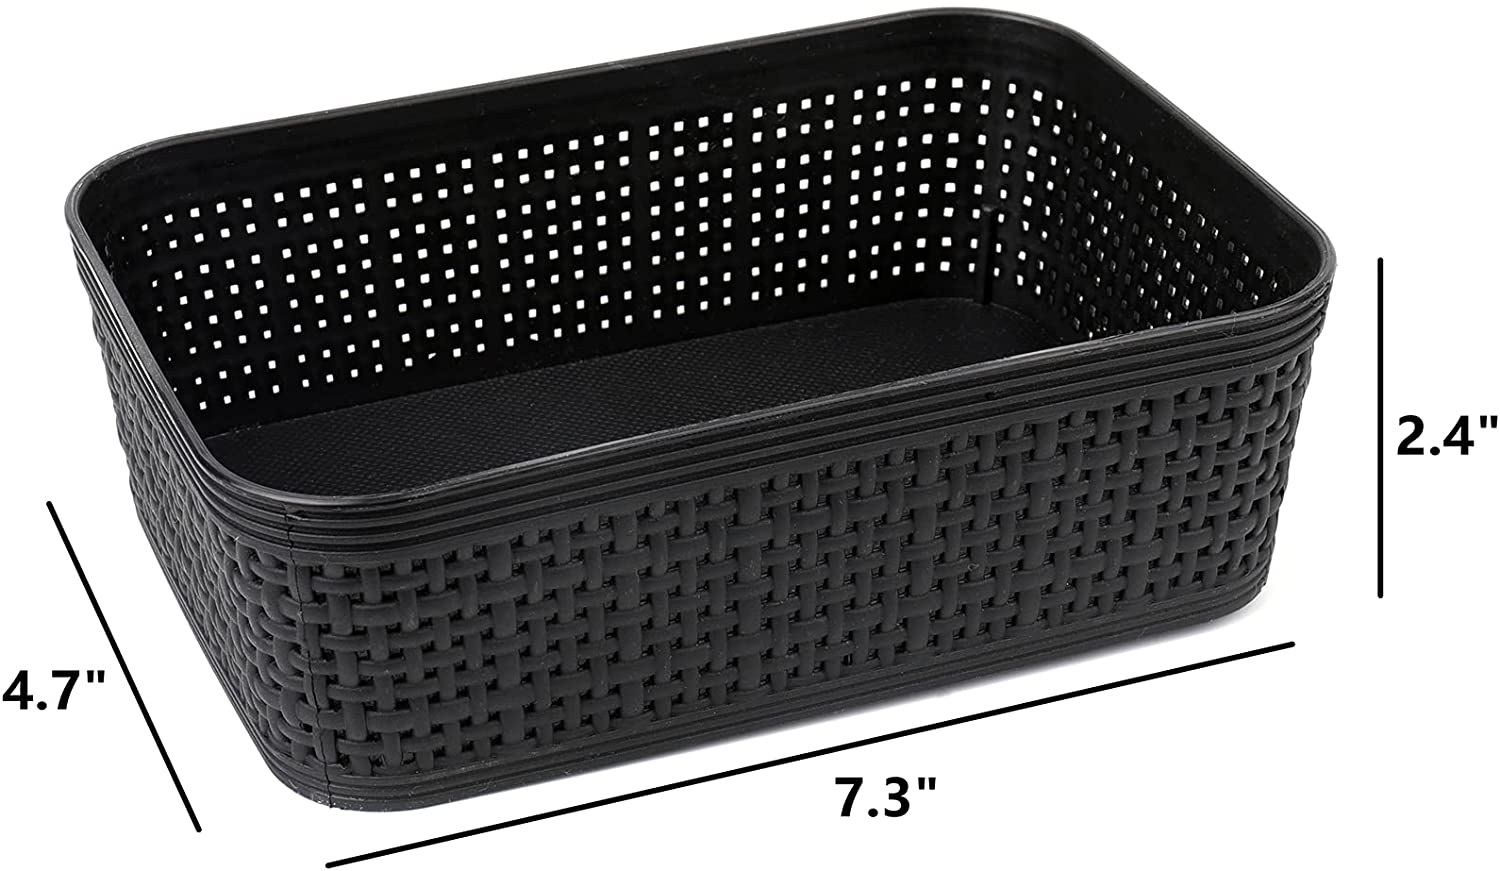 DEAYOU 9 Pack Plastic Storage Baskets, Small Weave Baskets Organizing Bins for Shelves, Pantry, Kitchen, Office, 7.3